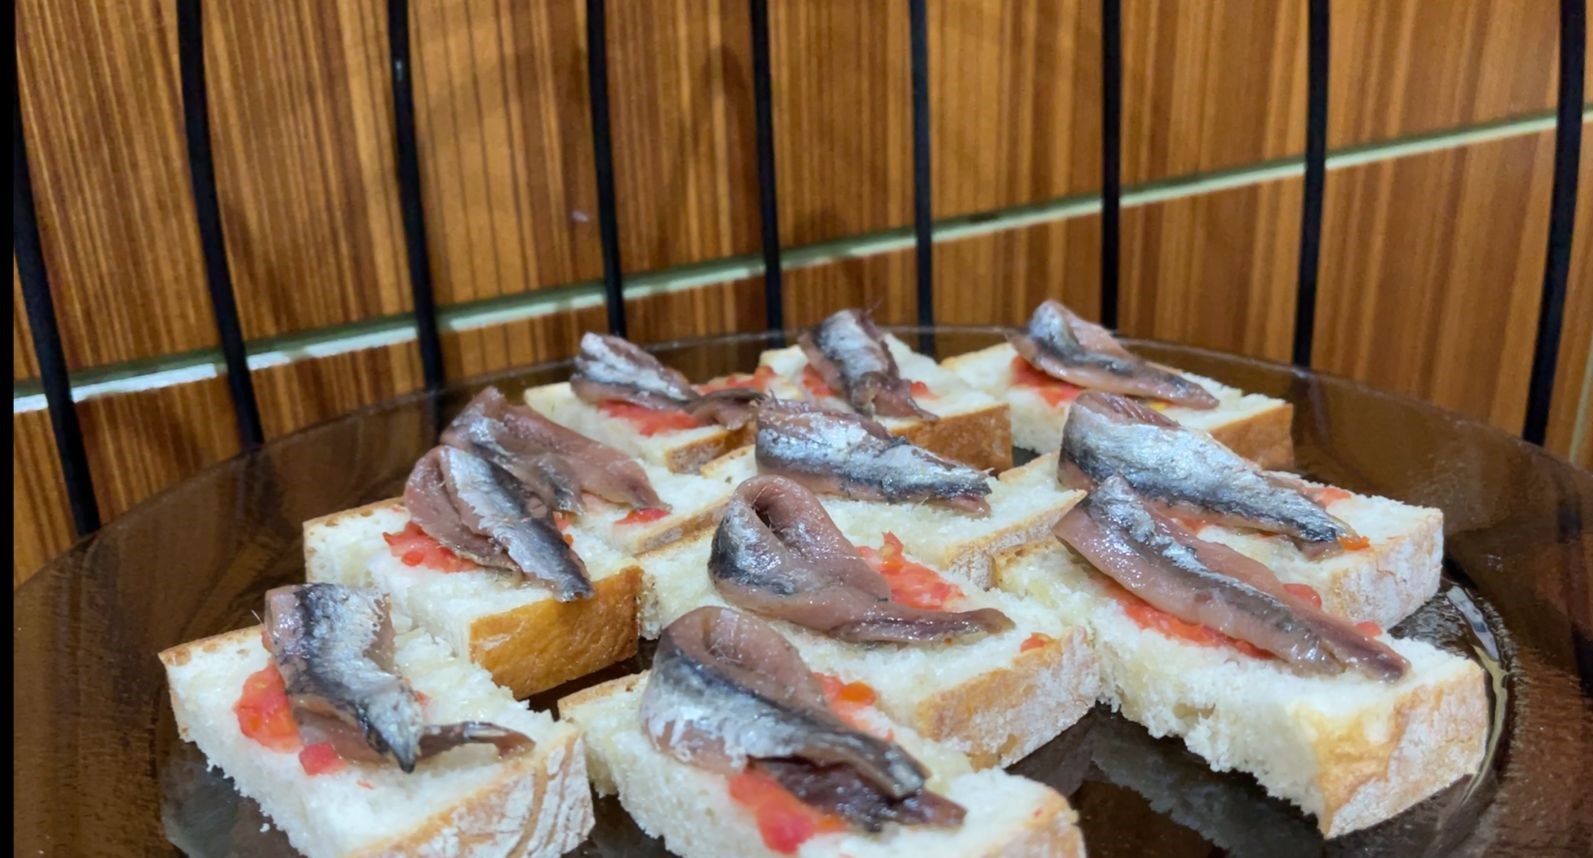 Anchovies and pa amb tomàquet at Dubai's Marriot hotel on December 18, 2021 (by Catalan food ministry)